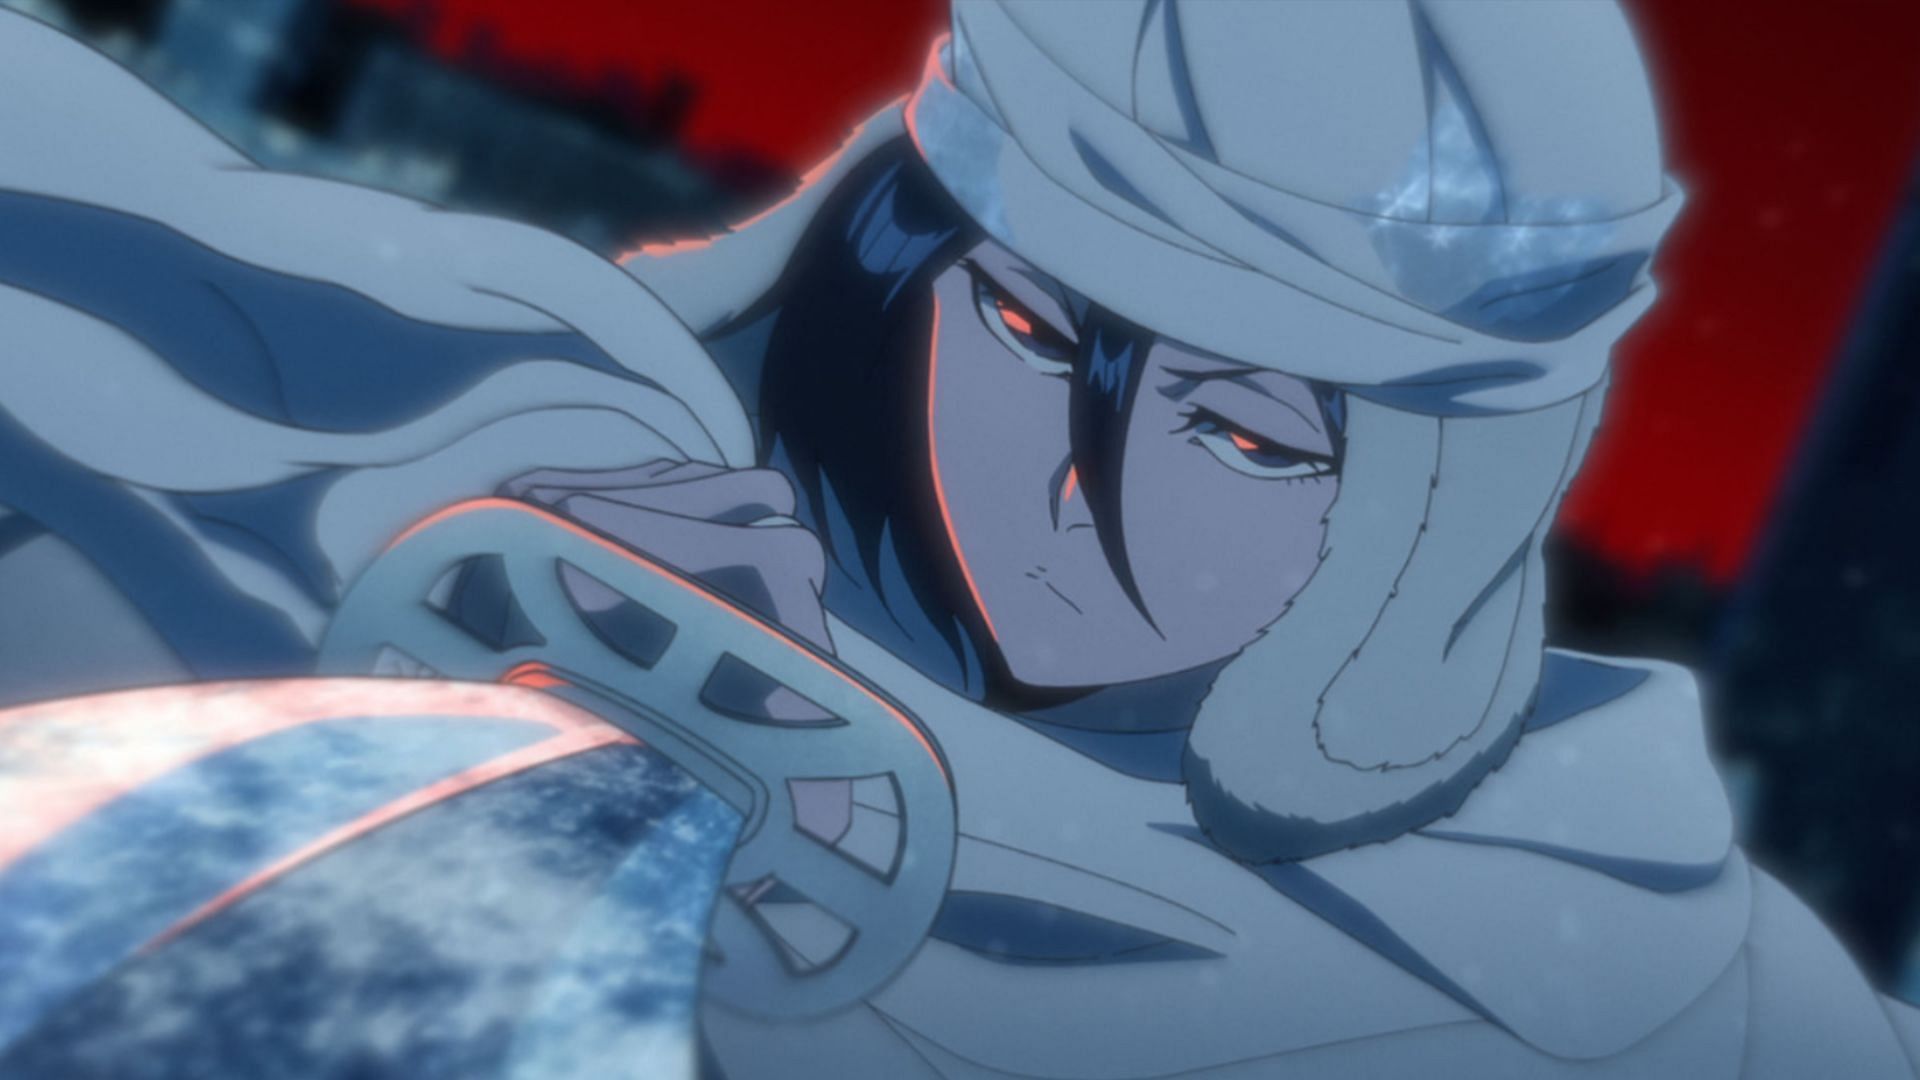 ANIME NEWS on Instagram: Ufotable works on Bleach Episode 19 with